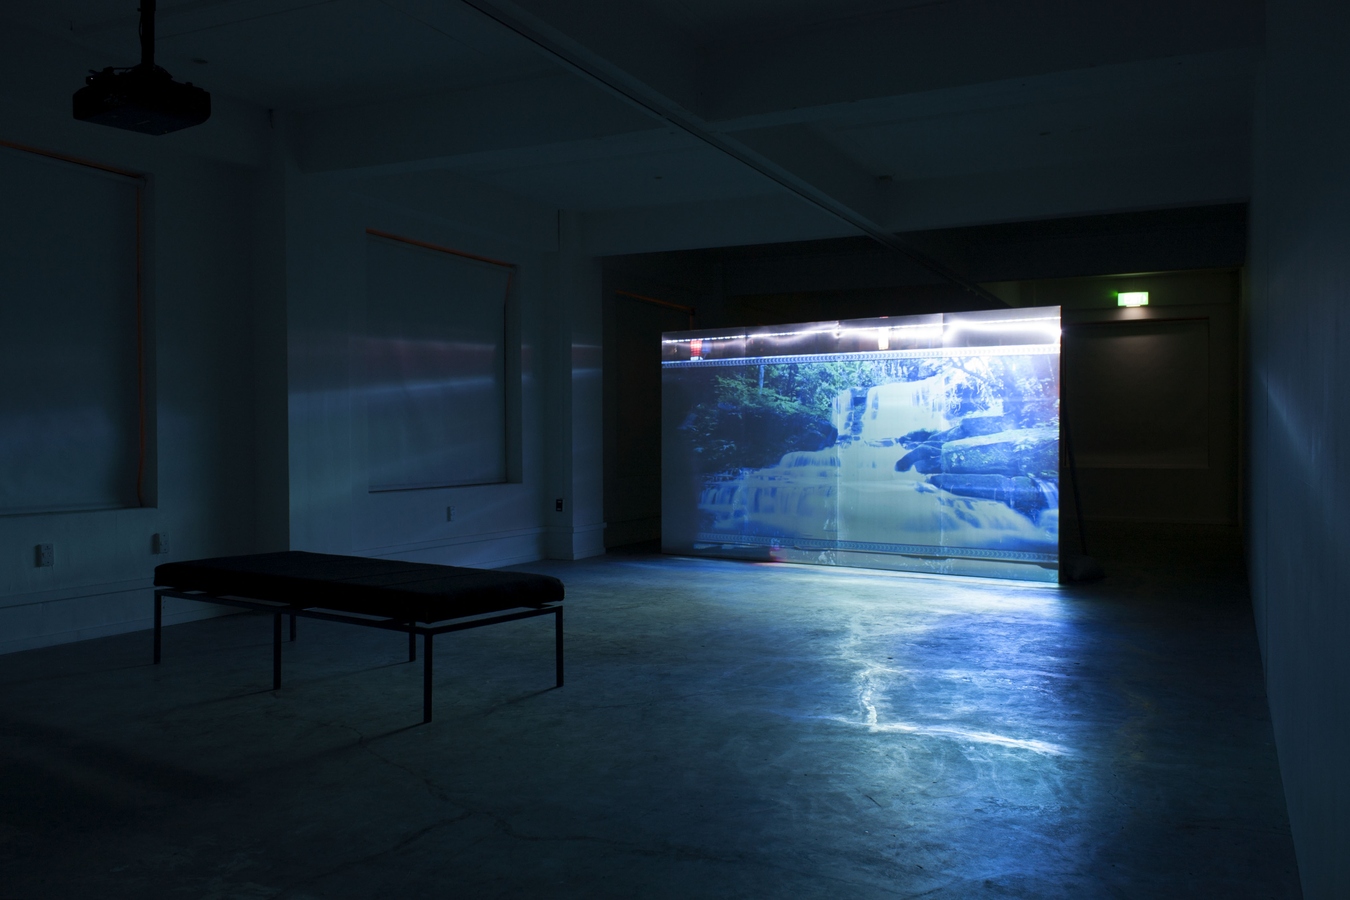 Lim Sokchanlina, Urban Street Night Club, 2013, installation with metal and wooden screen, single-channel video with sound, 16 minutes 16 seconds. Photo: Daegan Wells